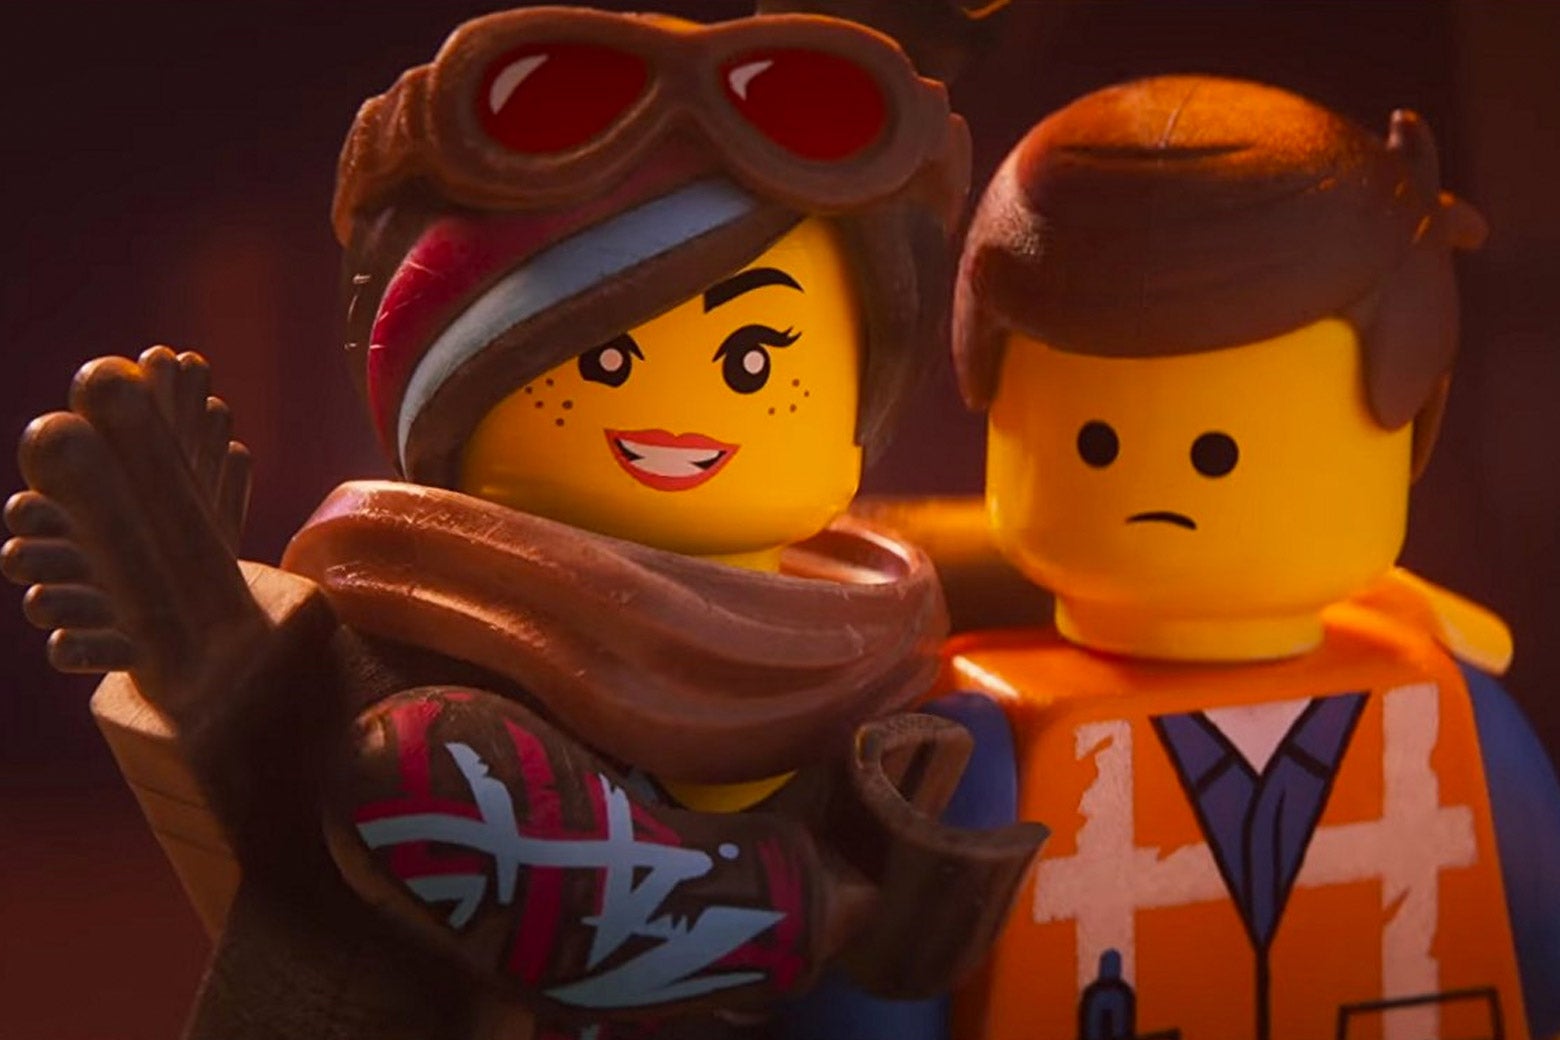 The Lego figurines Wyldstyle and Emmet.